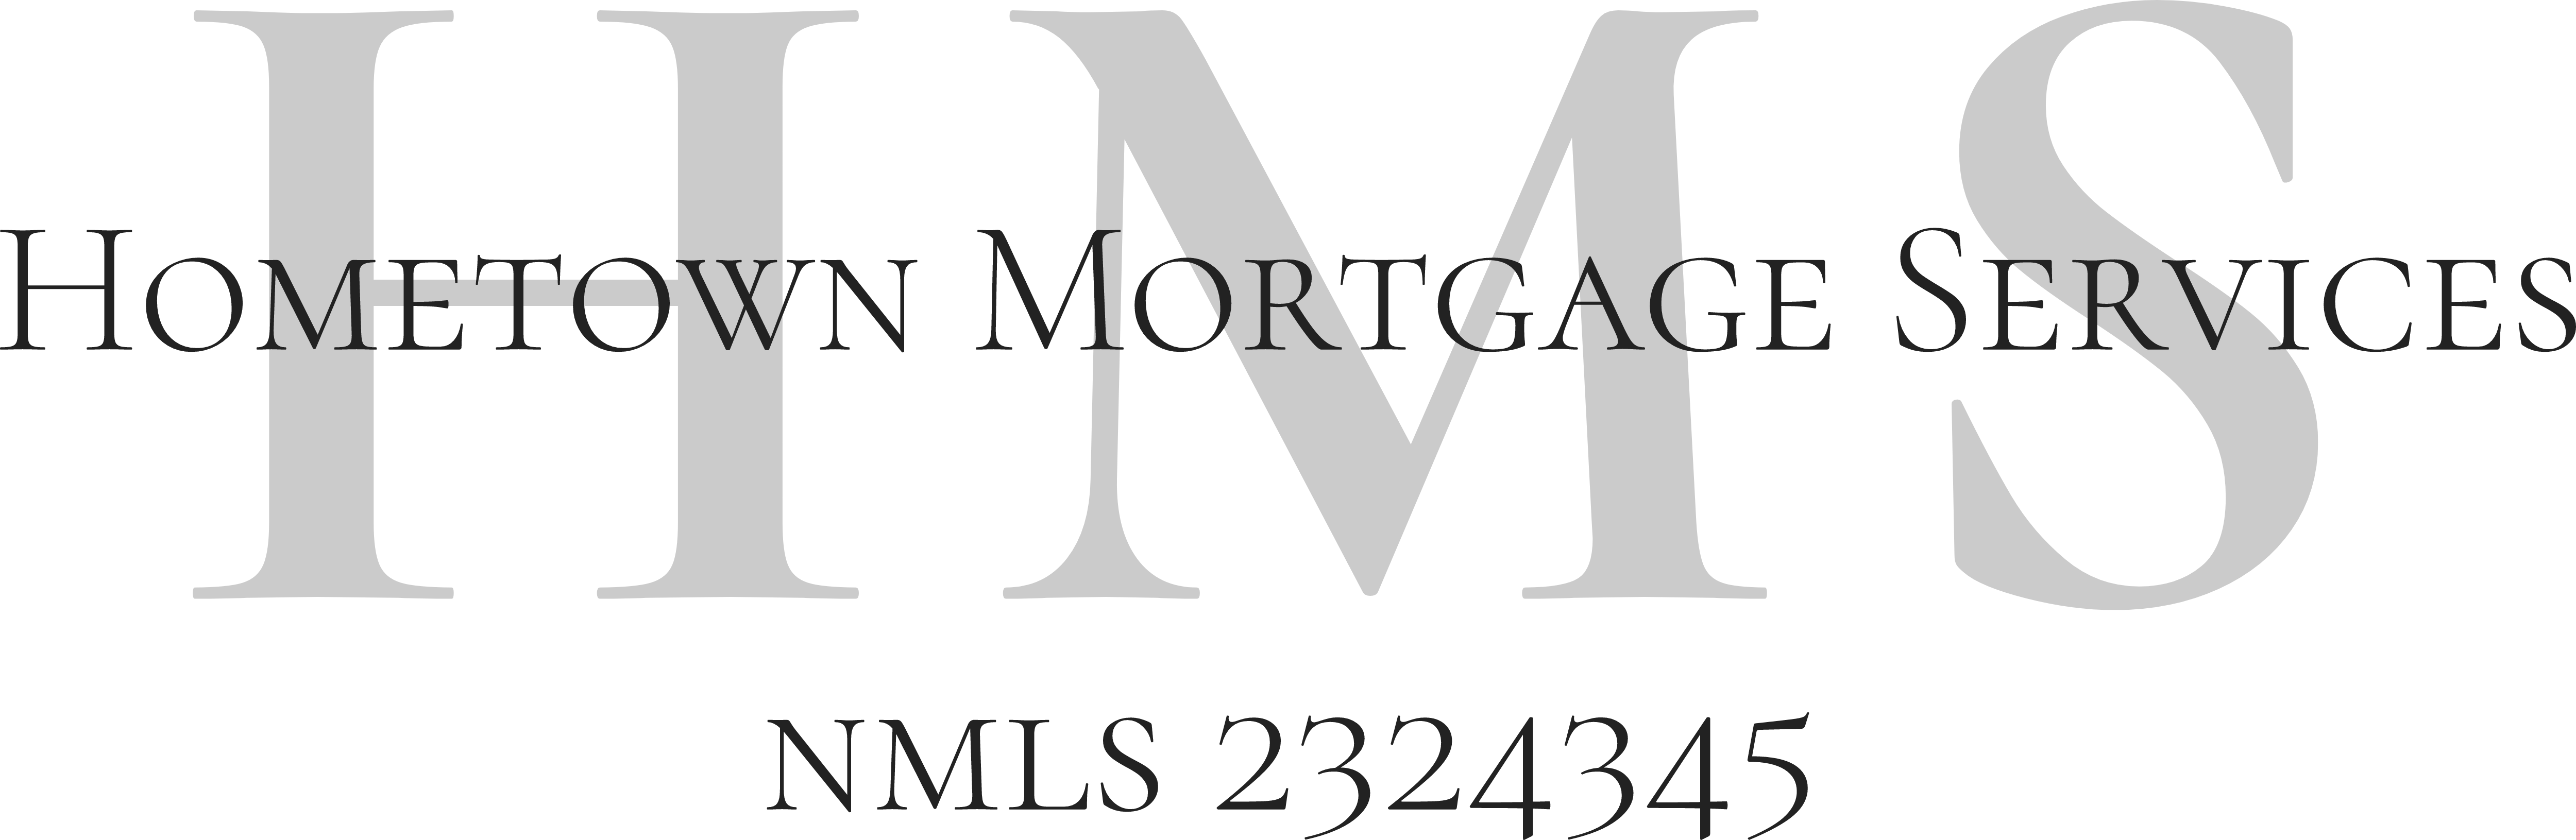 Hometown Mortgage Services